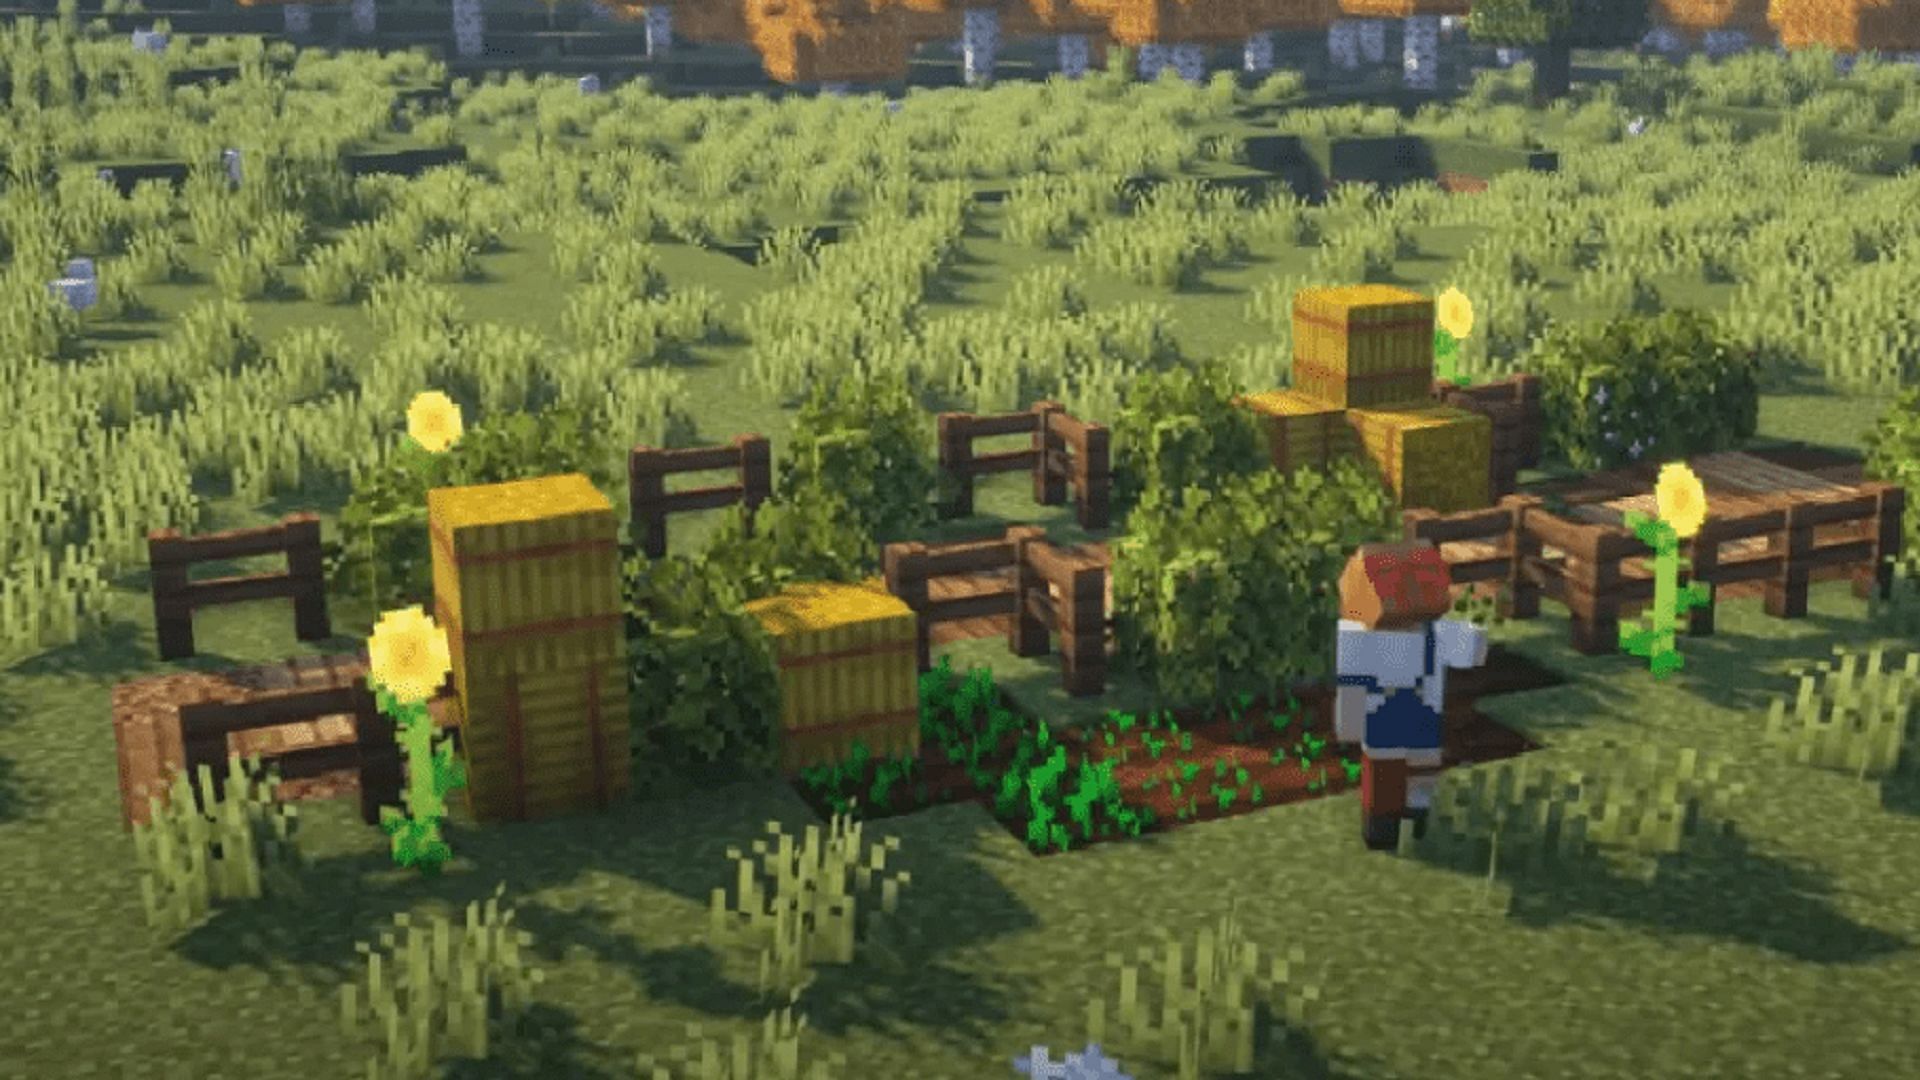 This path design is perfect for Overworld farms and plains biomes (Image via Minecraft.net)